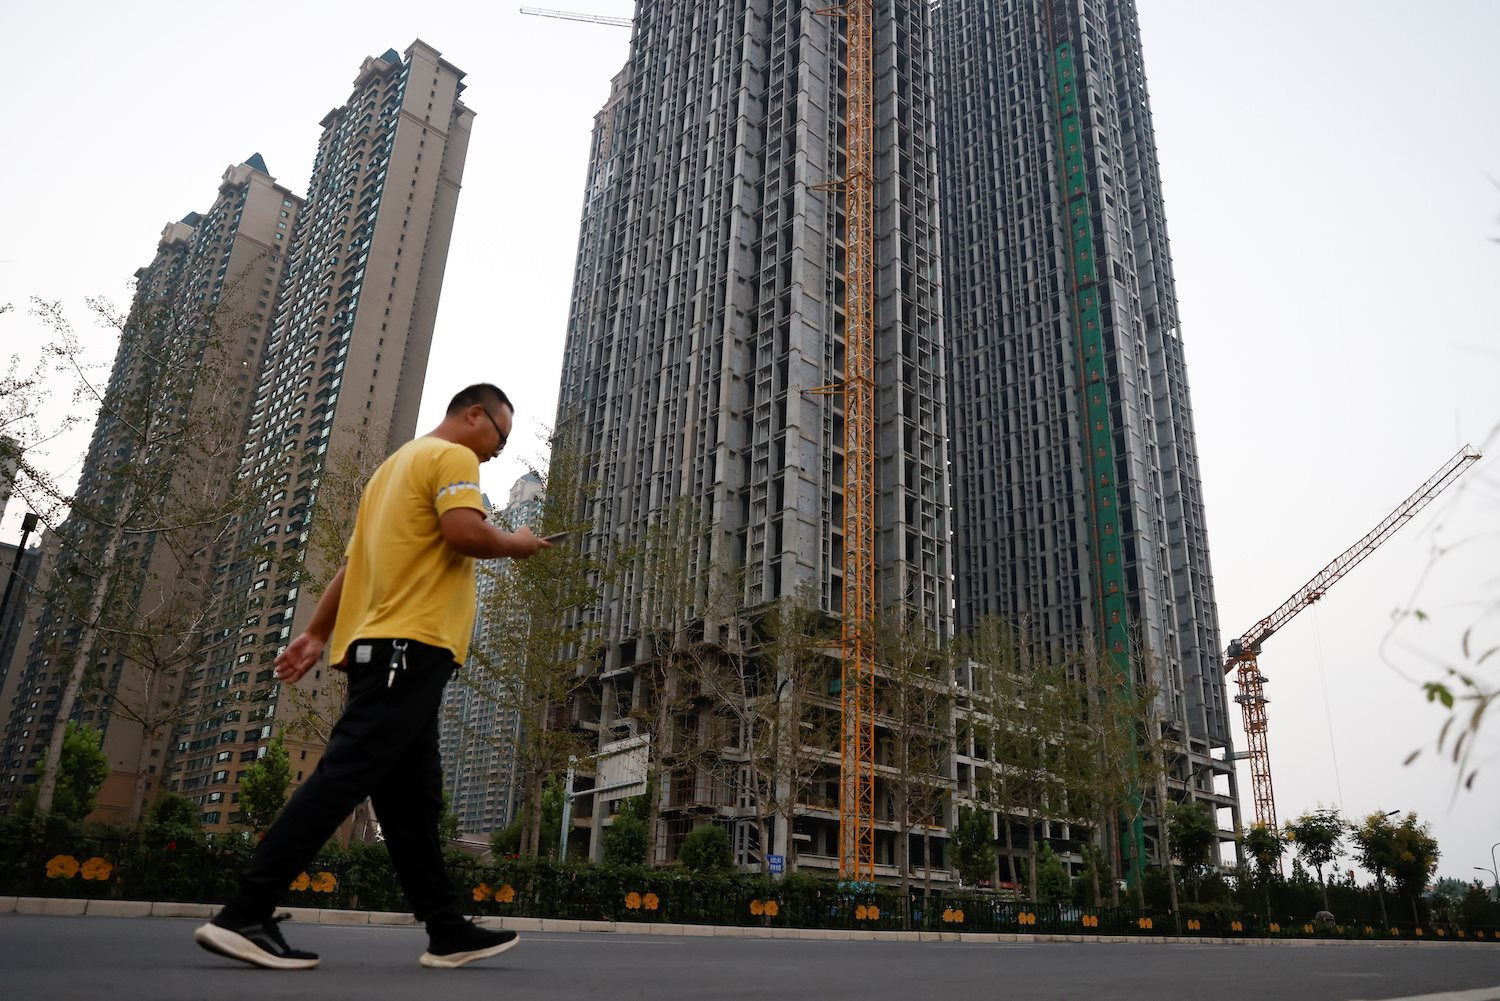 a-man-walks-by-unfinished-residential-blocks-at-the-evergrande-oasis-a-complex-developed-by-evergrande-group-in-luoyang-china-on-sept-15-2021.-rtrscg-rawlins.jpg